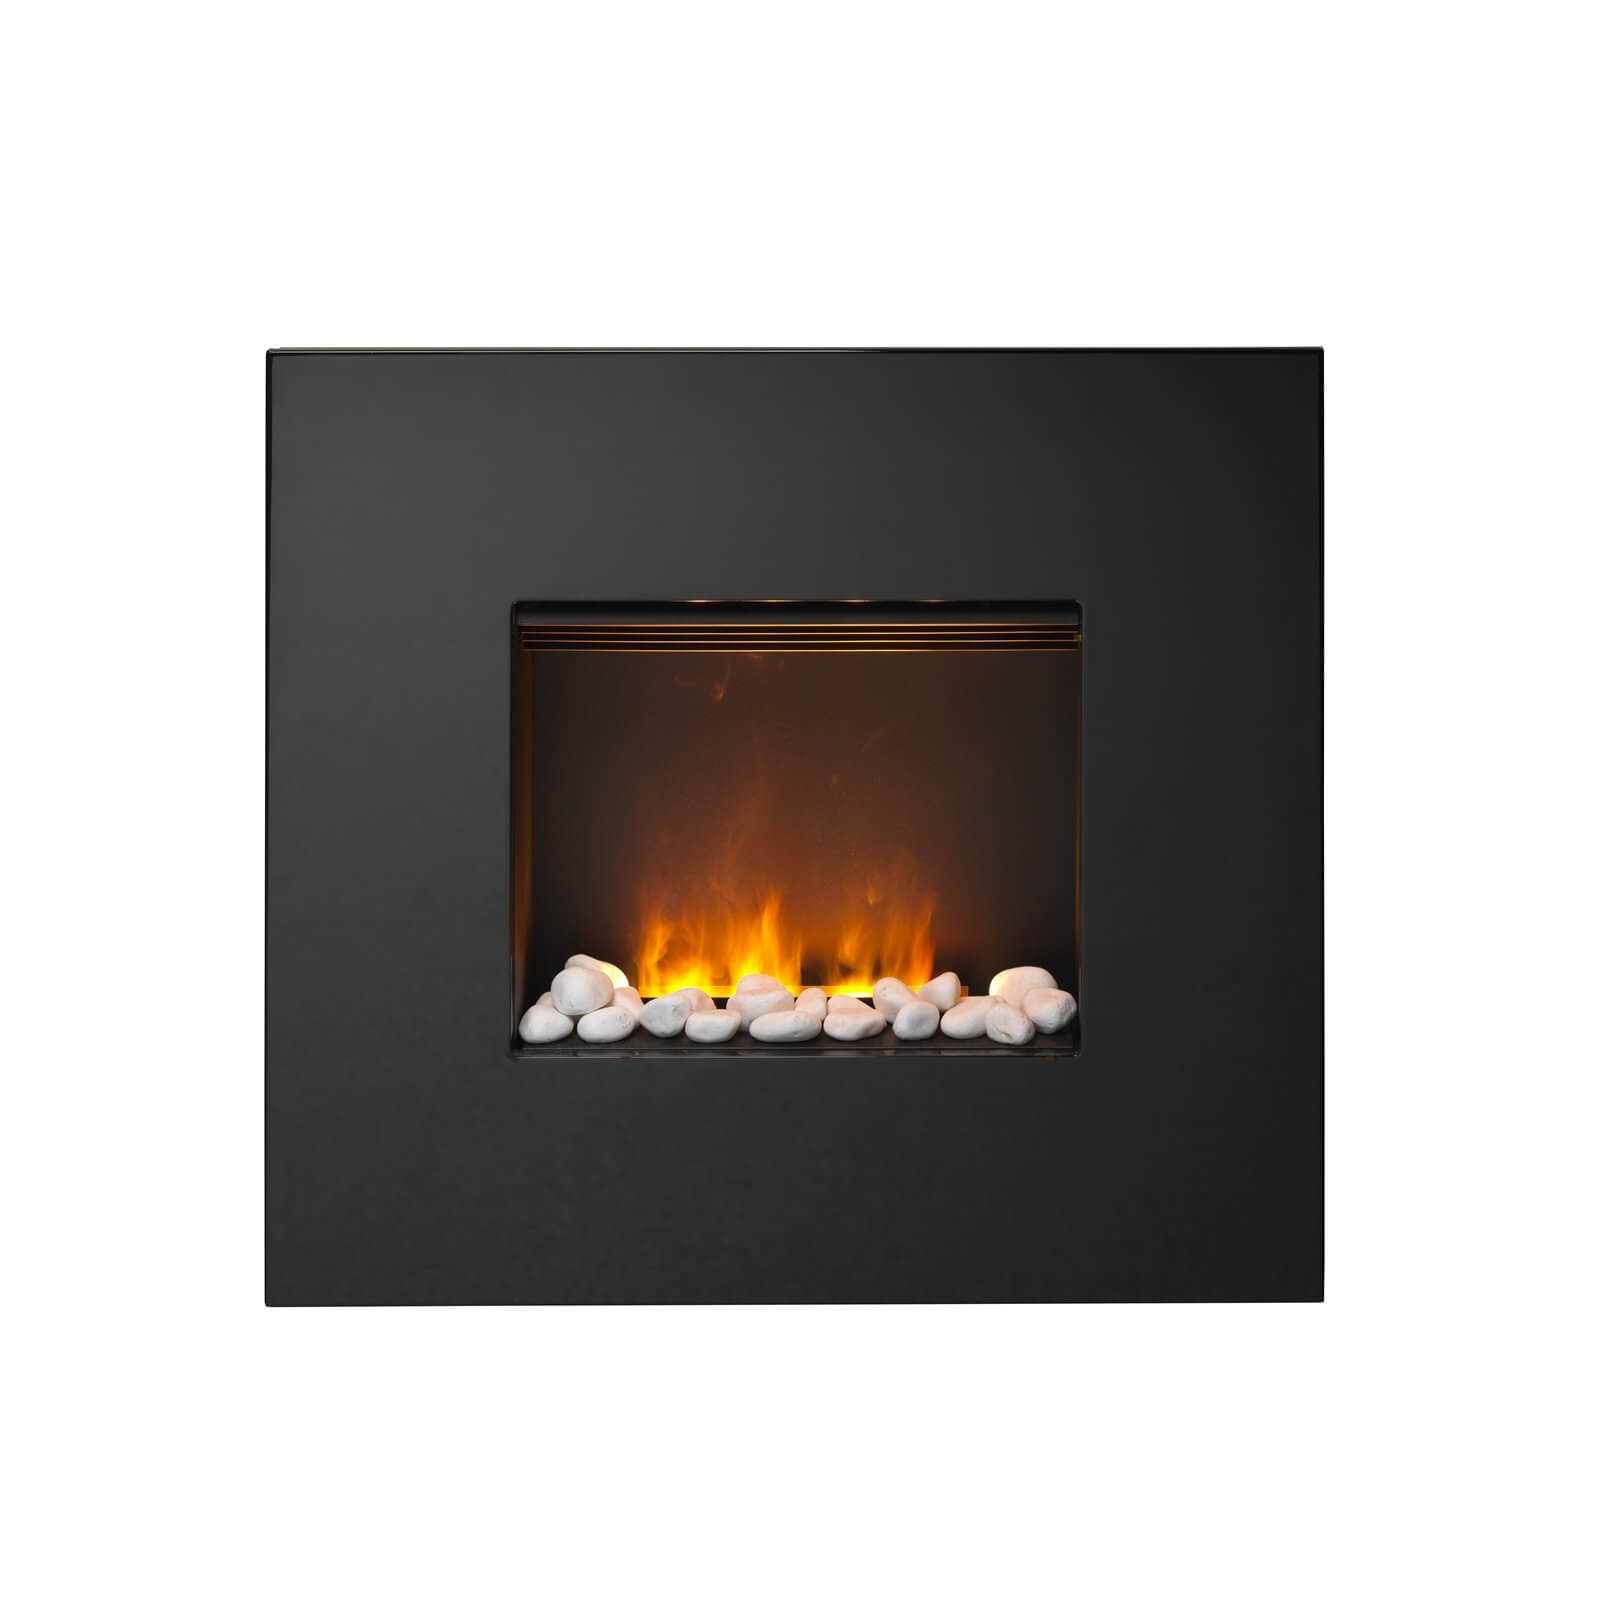 Photo of Dimplex Pemberley Optimyst 2kw Electric Wall Fire